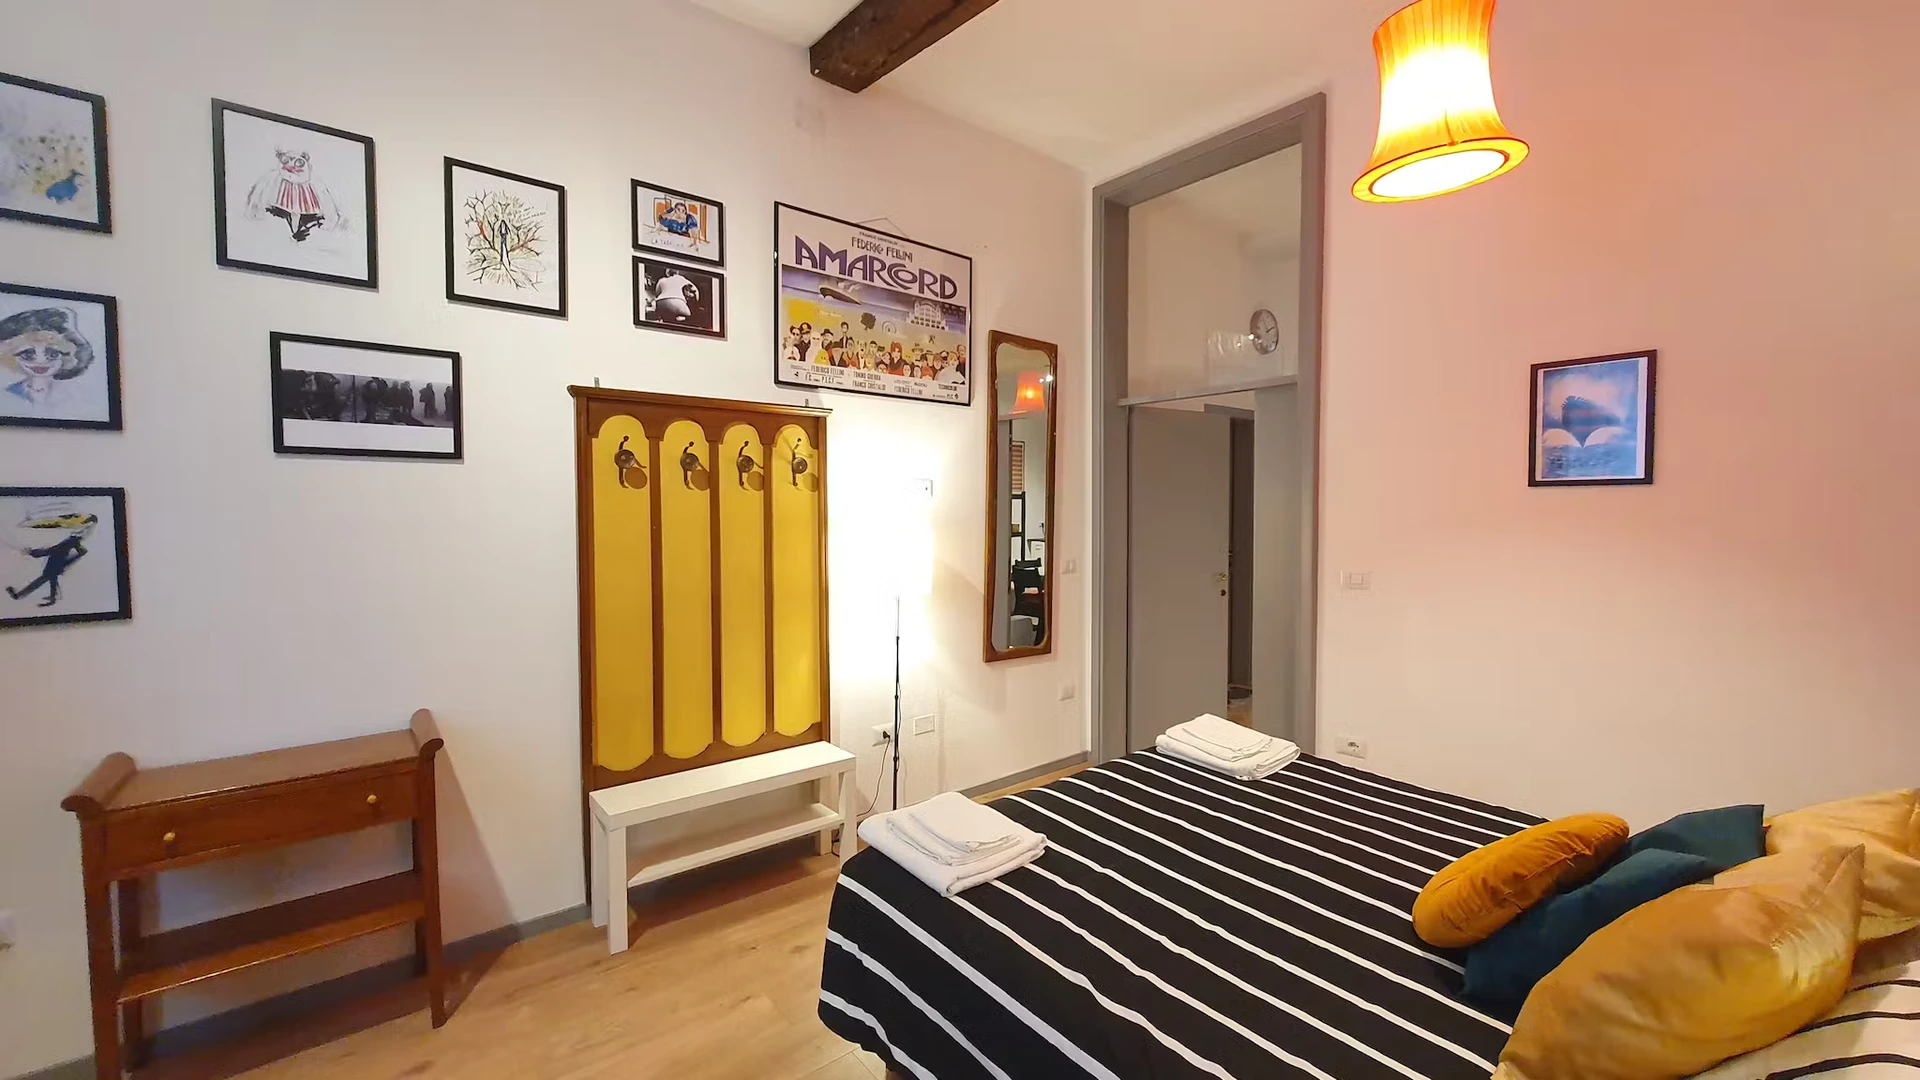 Accommodation with 3 bedrooms in Forlì